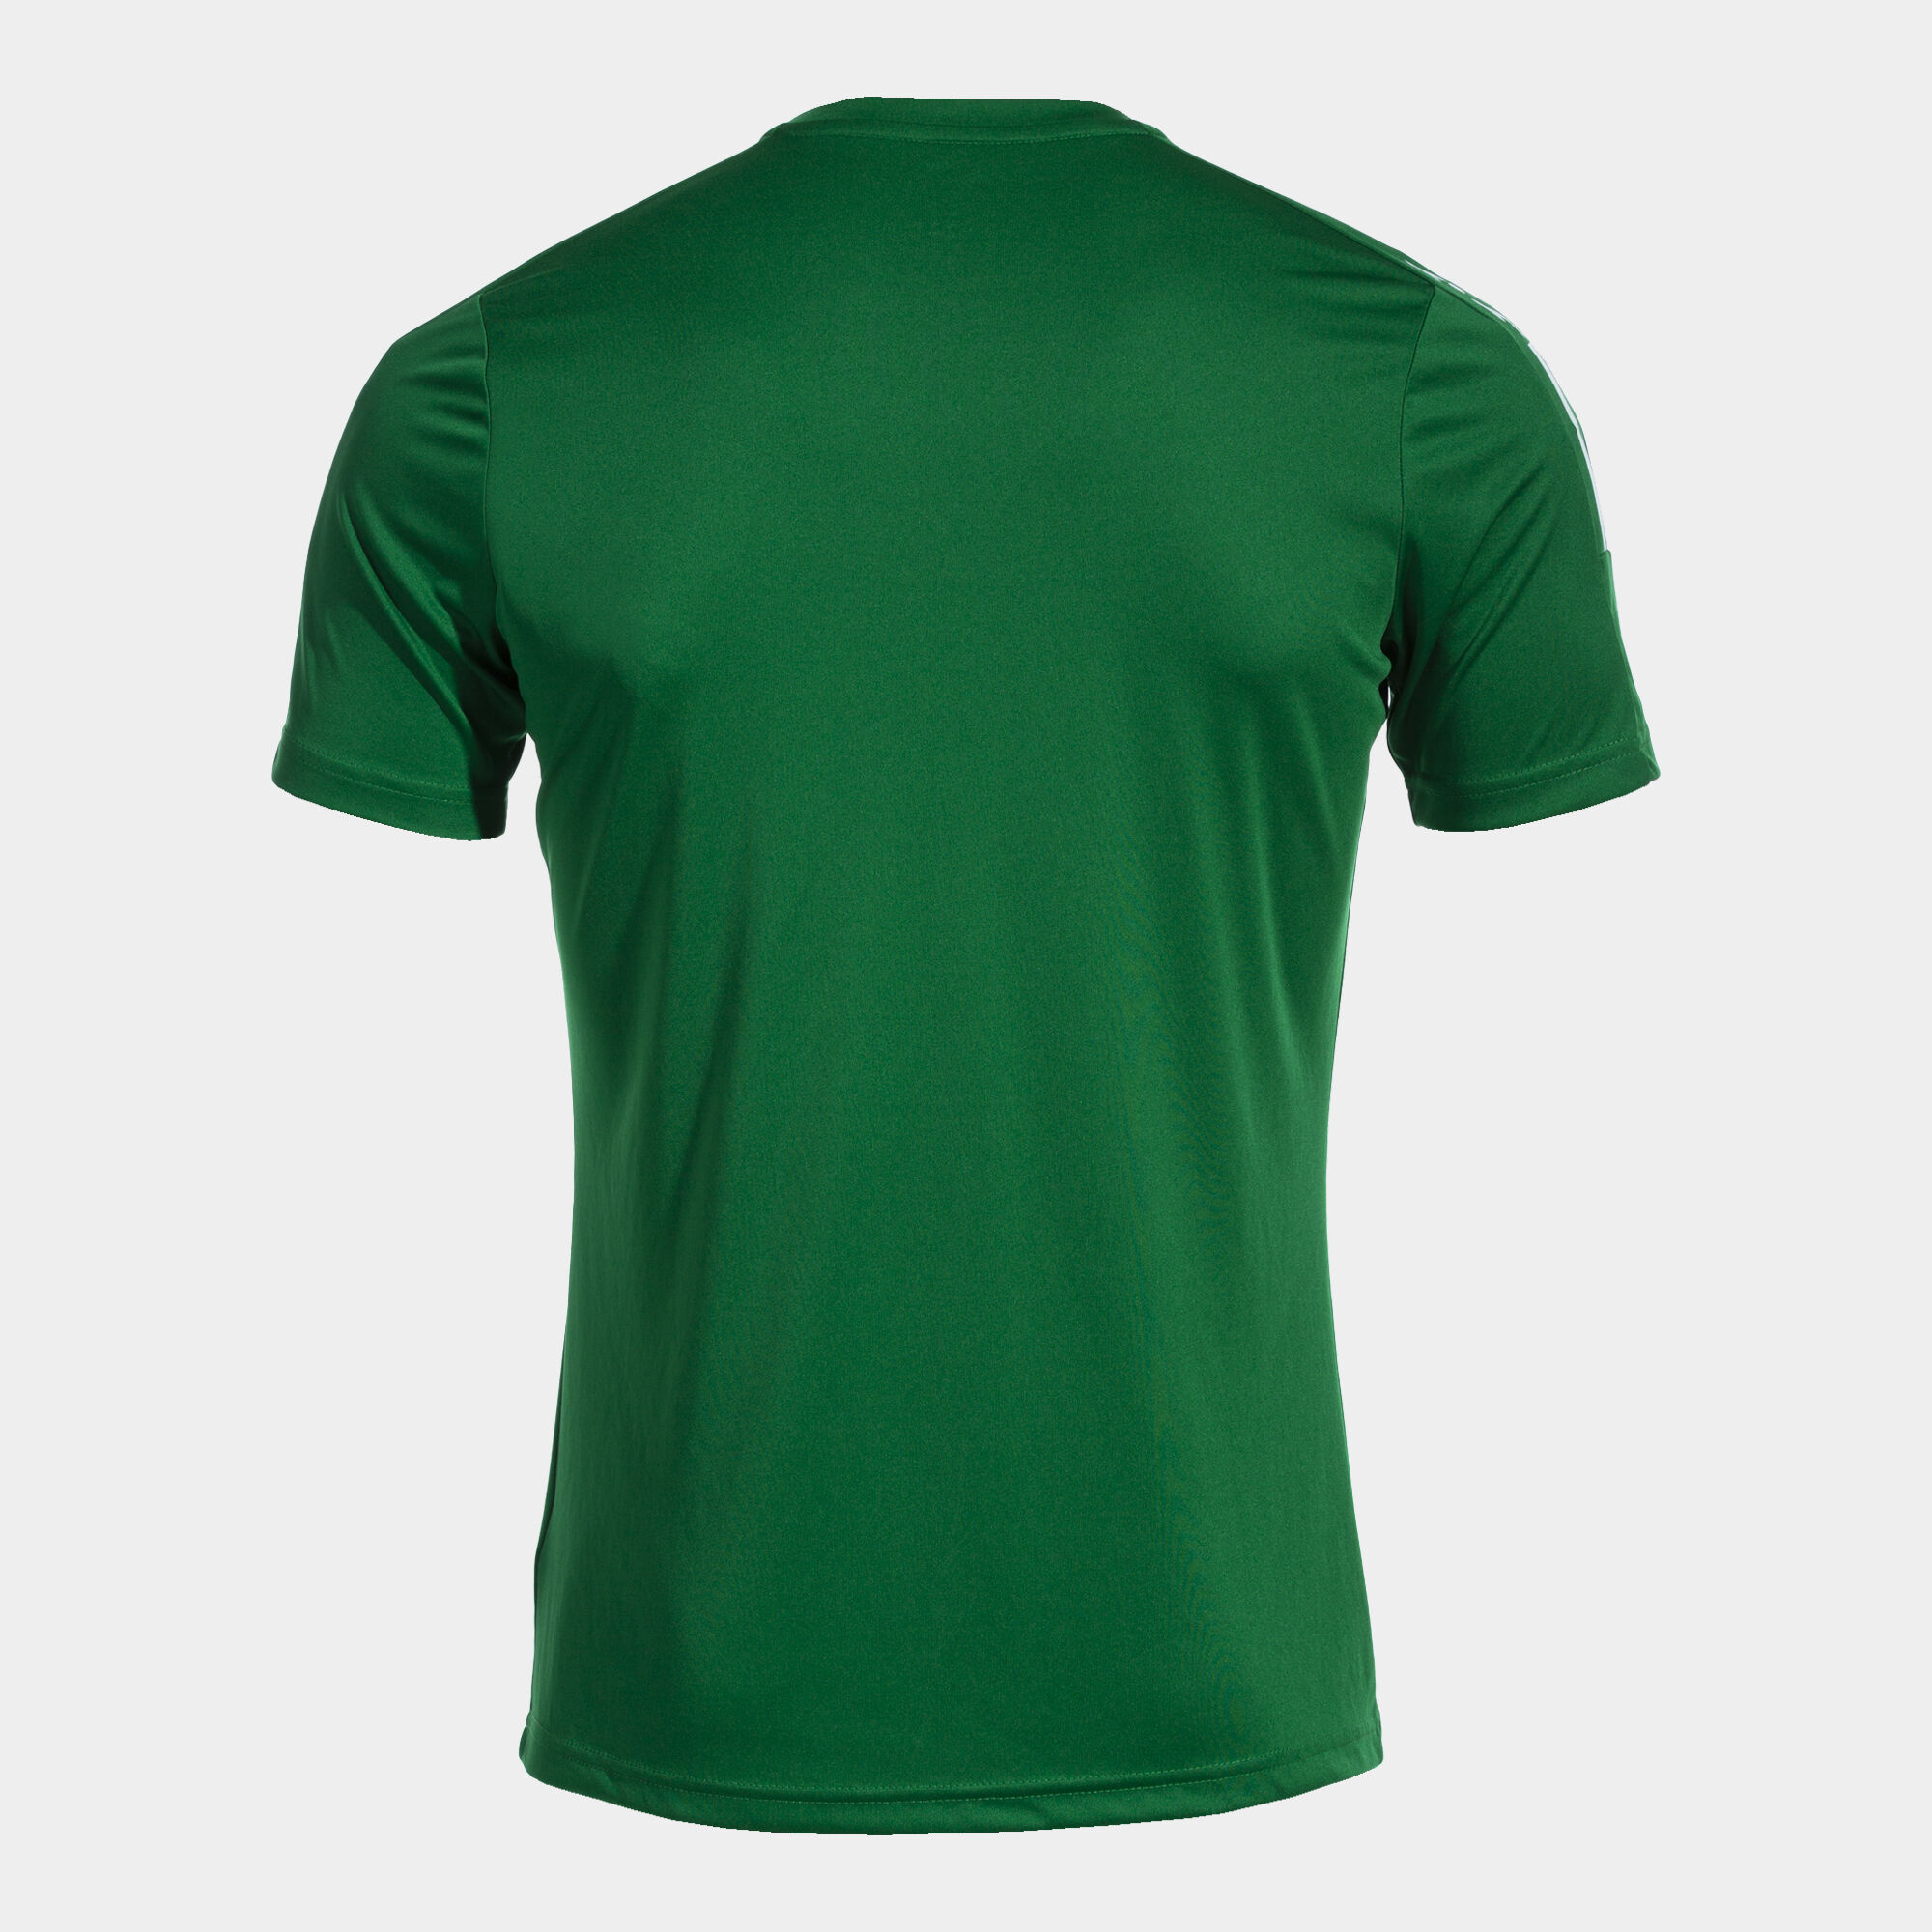 Maillot manches courtes homme Olimpiada vert